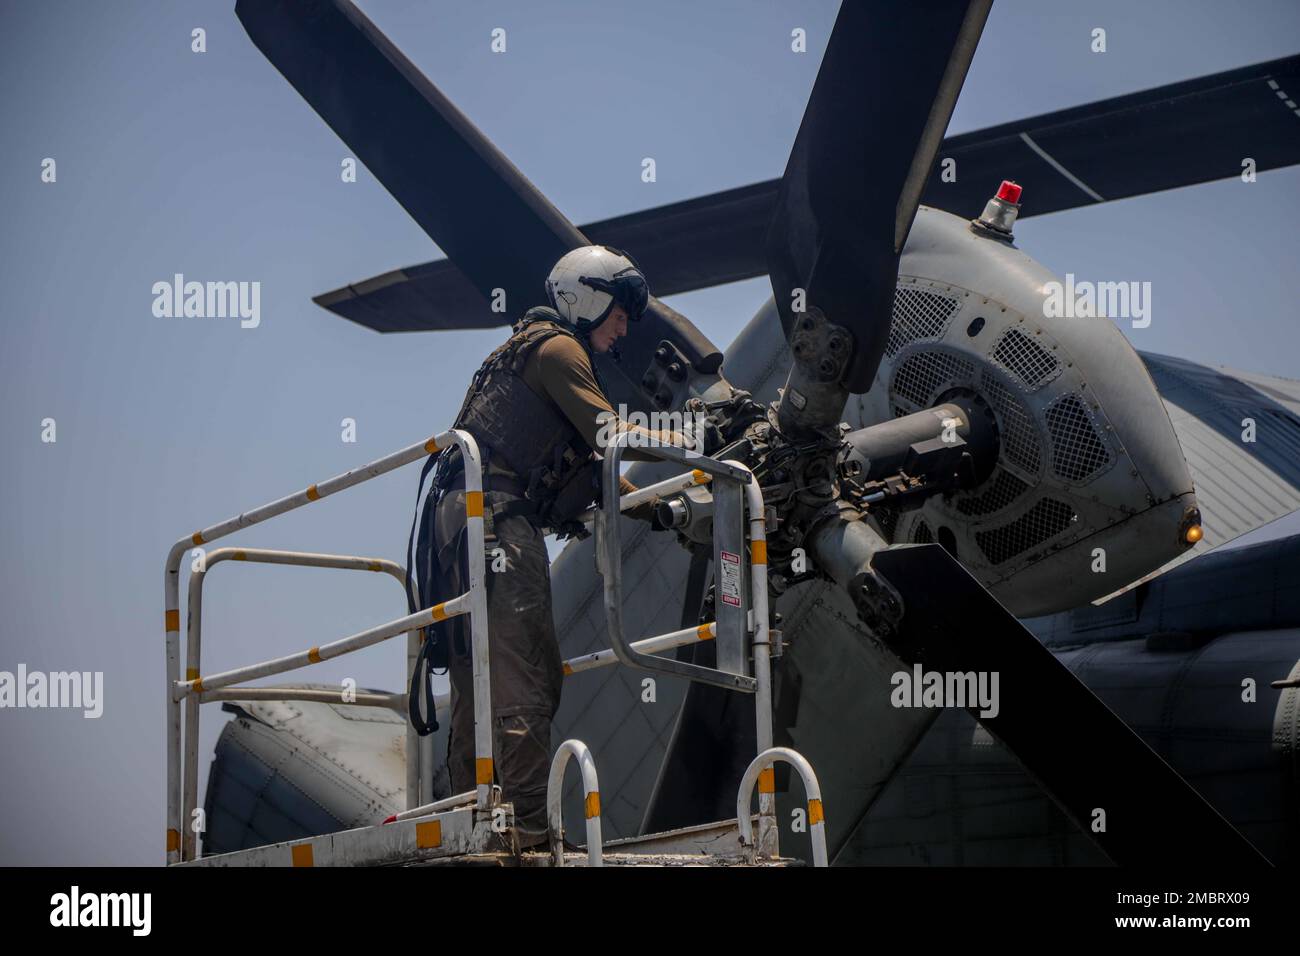 220621-A-EQ028-1103 ARABIAN GULF (June 21, 2022) Aviation Warfare Systems 2nd Class Brian Wall performs a preflight inspection on an MH-53 Sea Dragon helicopter attached to Helicopter Mine Countermeasures (HM) Squadron 15, aboard the expeditionary sea base USS Lewis B. Puller (ESB 3), during exercise Iron Defender in the Arabian Gulf, June 21. Iron Defender is an annual bilateral training event between U.S. Naval Forces Central Command and forces from the United Arab Emirates. The exercise focuses on maritime security operations, mine countermeasures, and harbor defense. Stock Photo